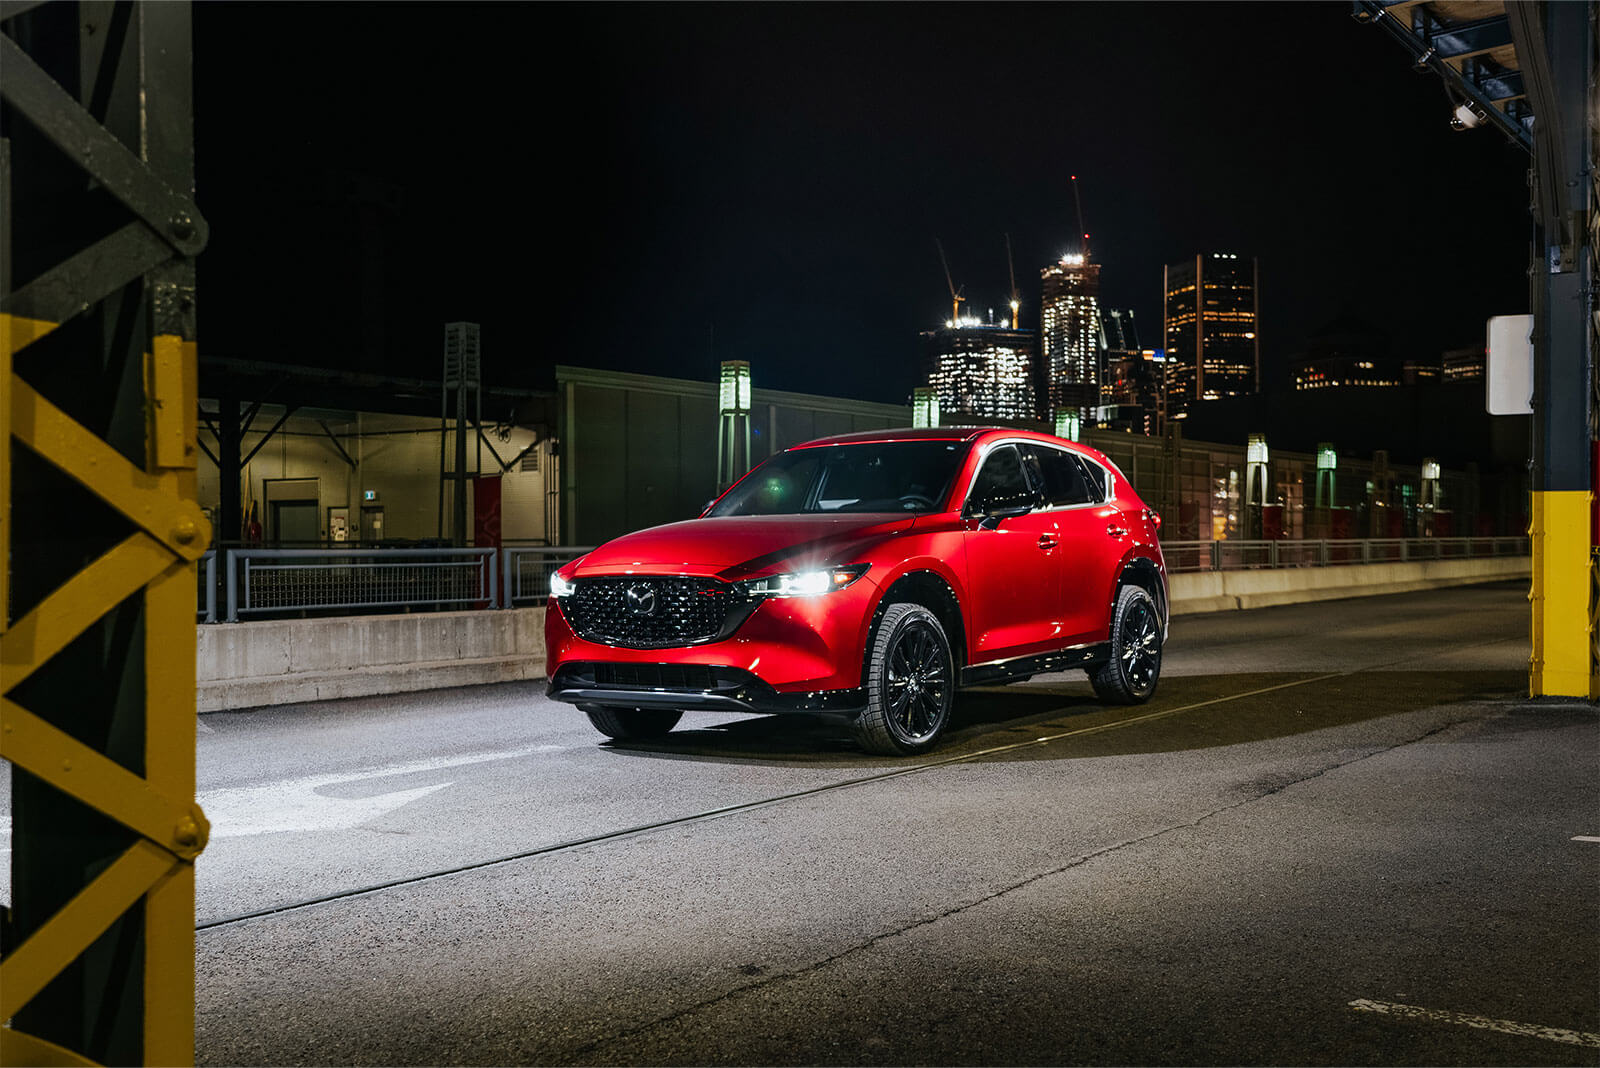 Soul Red Crystal Metallic Mazda CX-5 drives past blurred structures along urban street.